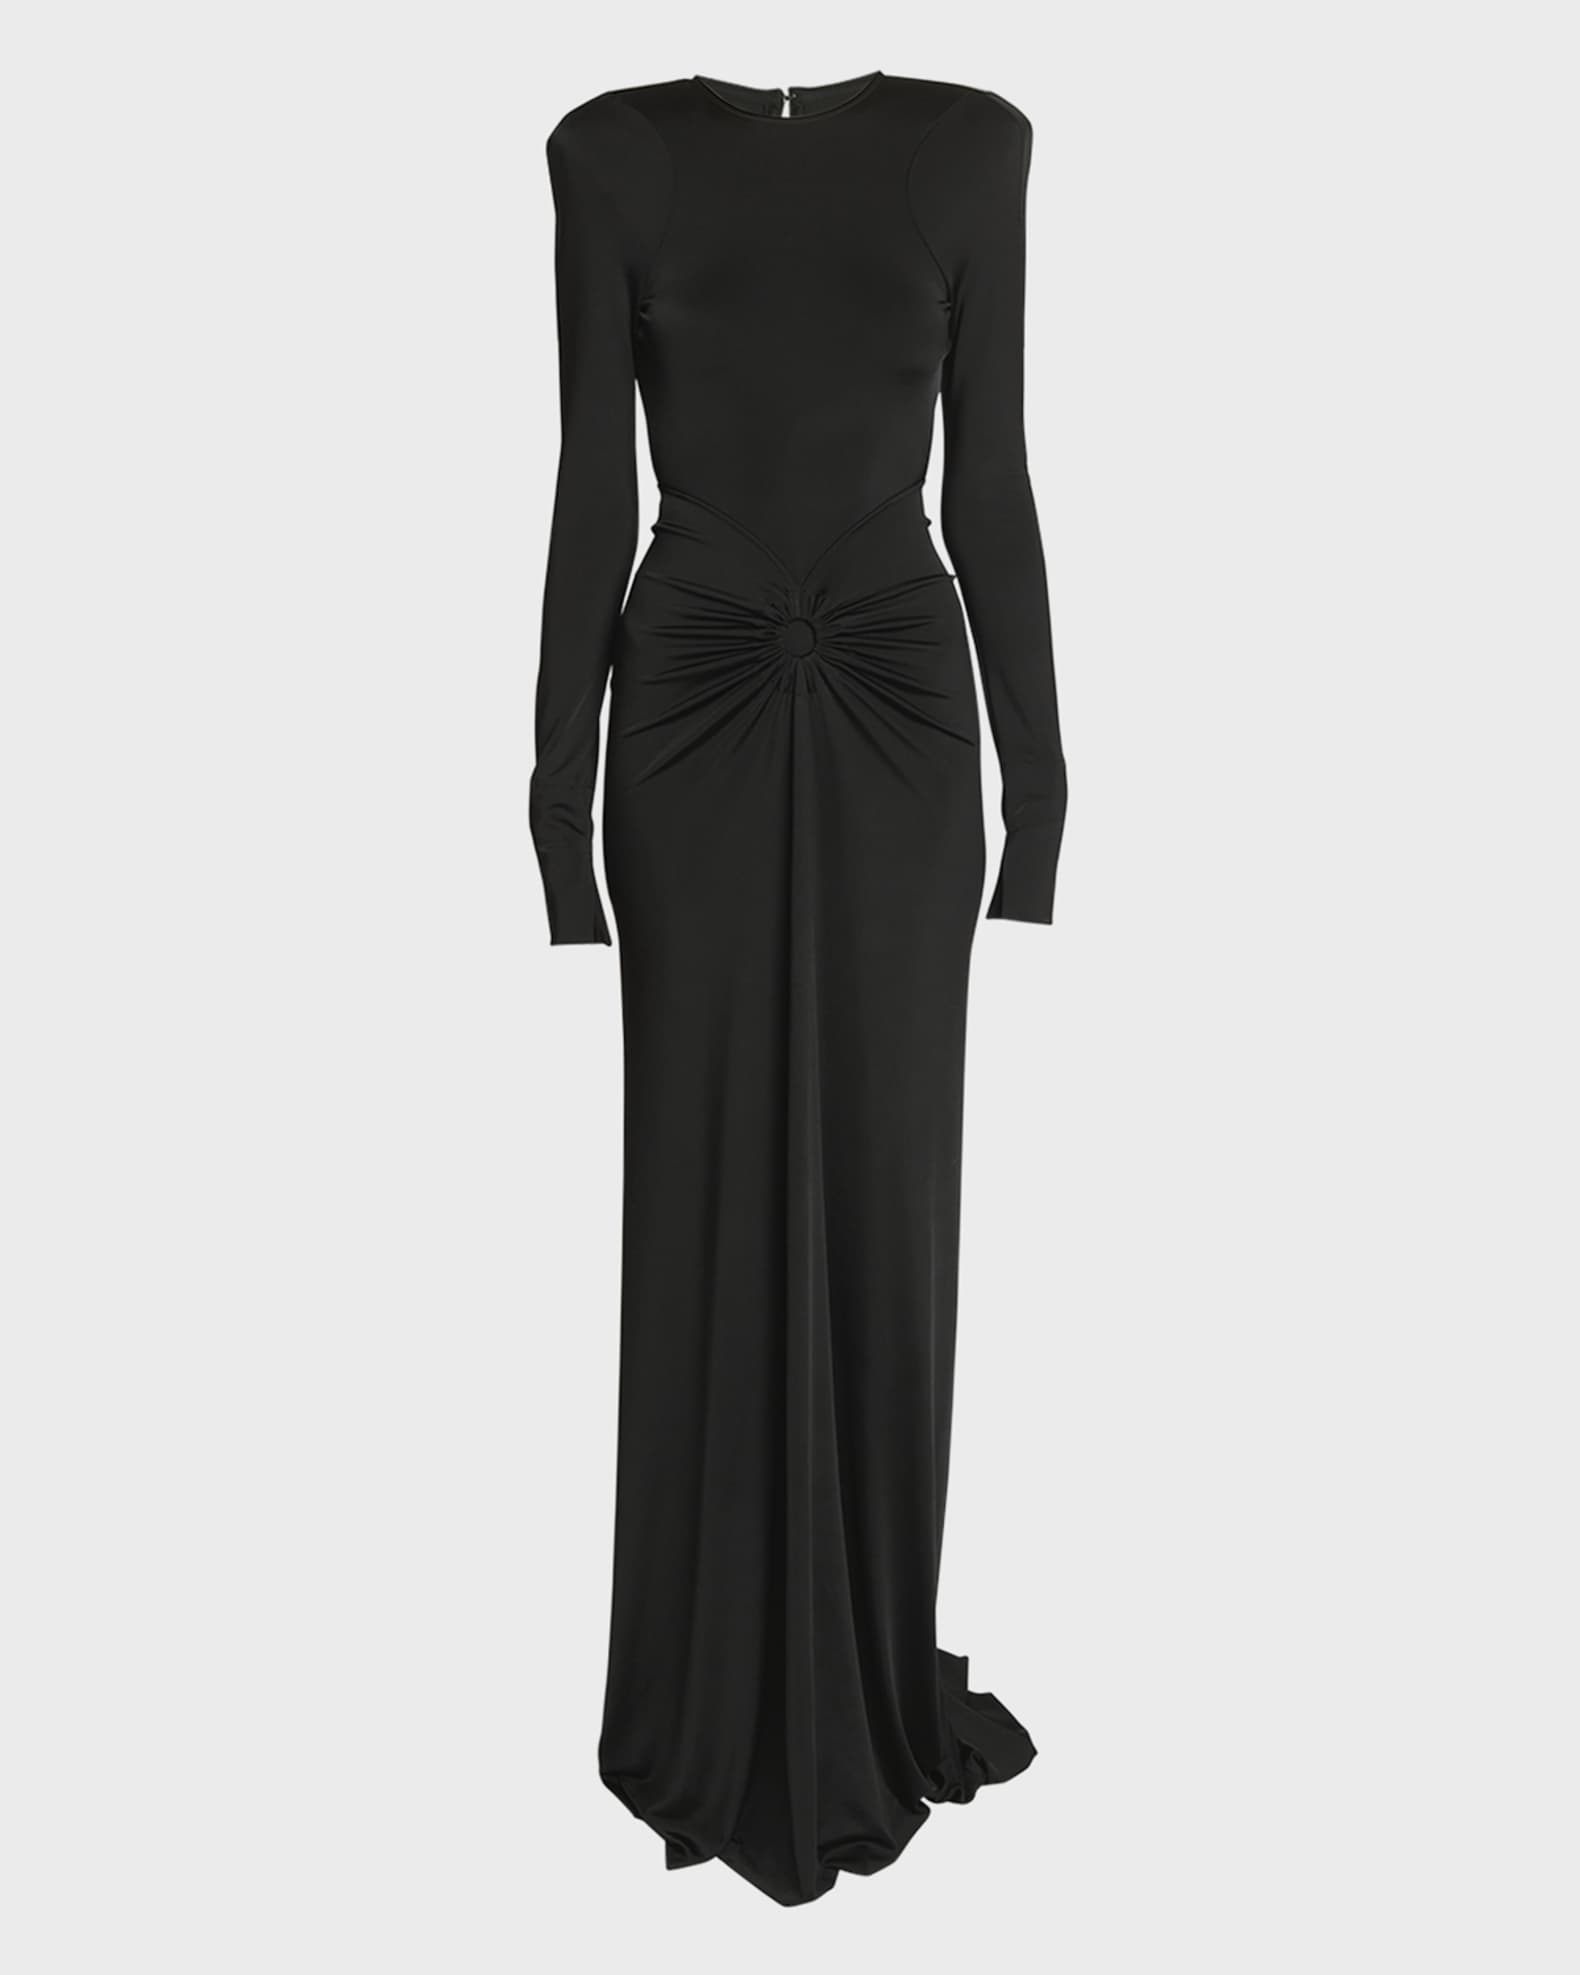 Victoria Beckham Open Back Gown with Gathered Circle Detail | Neiman Marcus